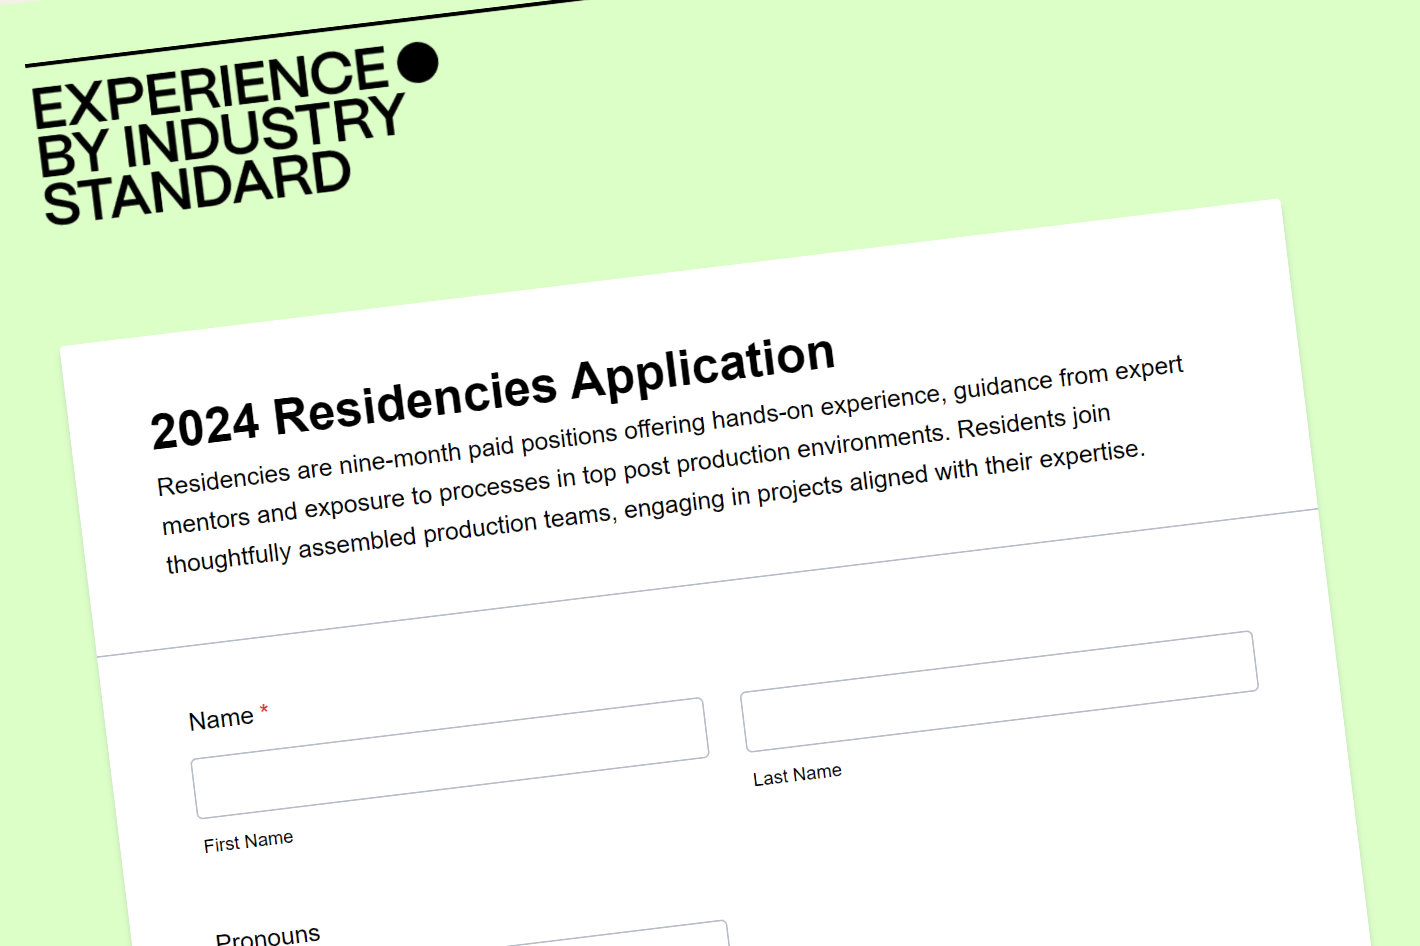 Industry Standard offers a nine-month paid residency